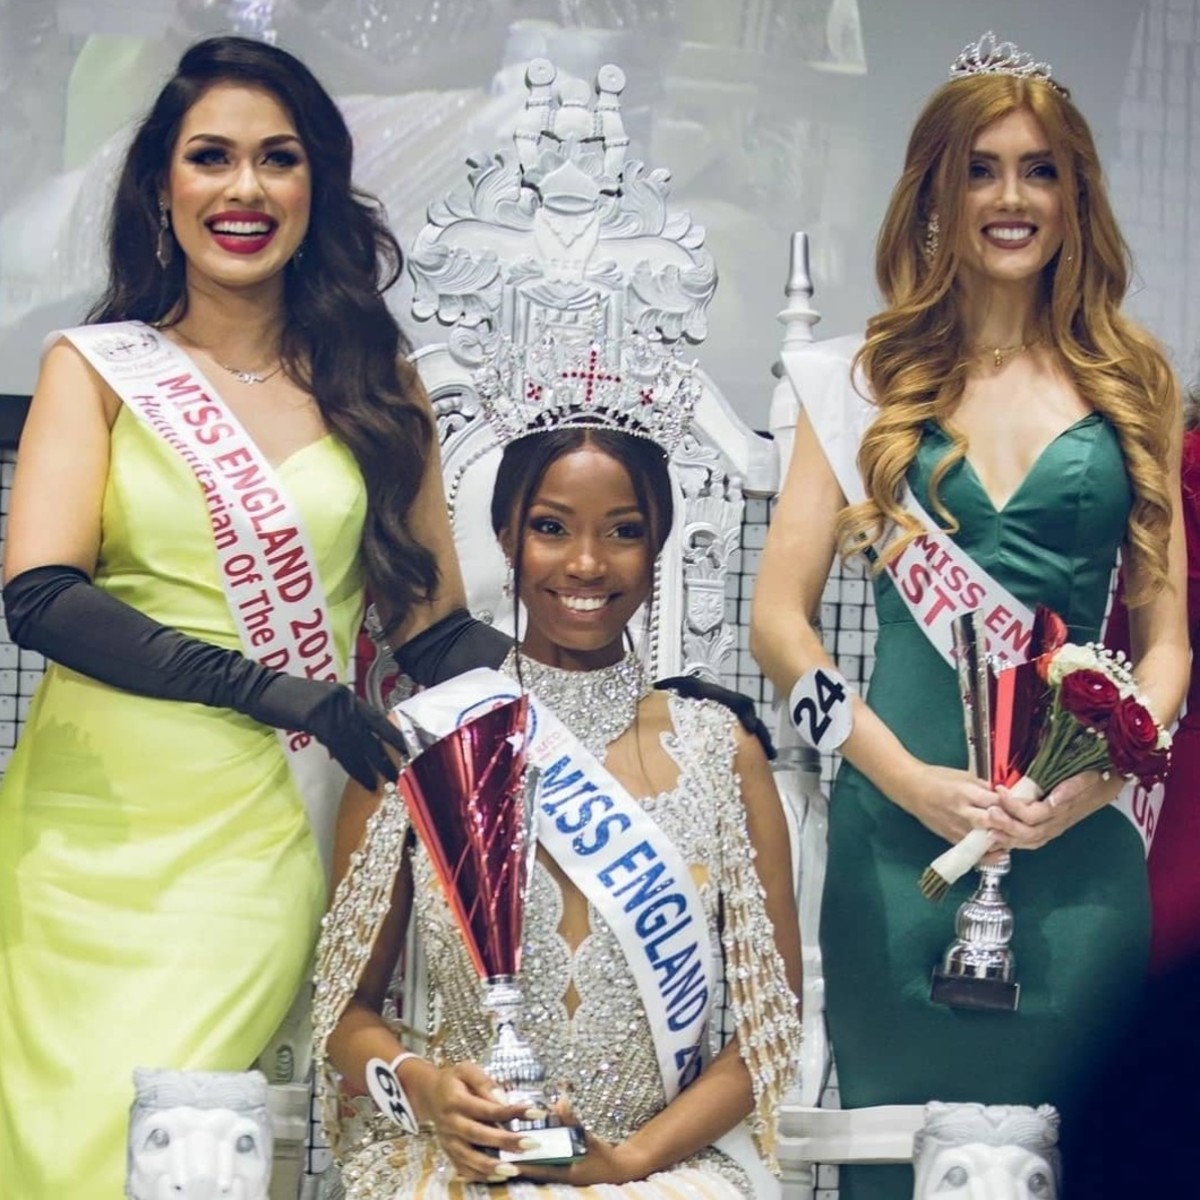 MISS ENGLAND 2021 CROWNED - Miss World England